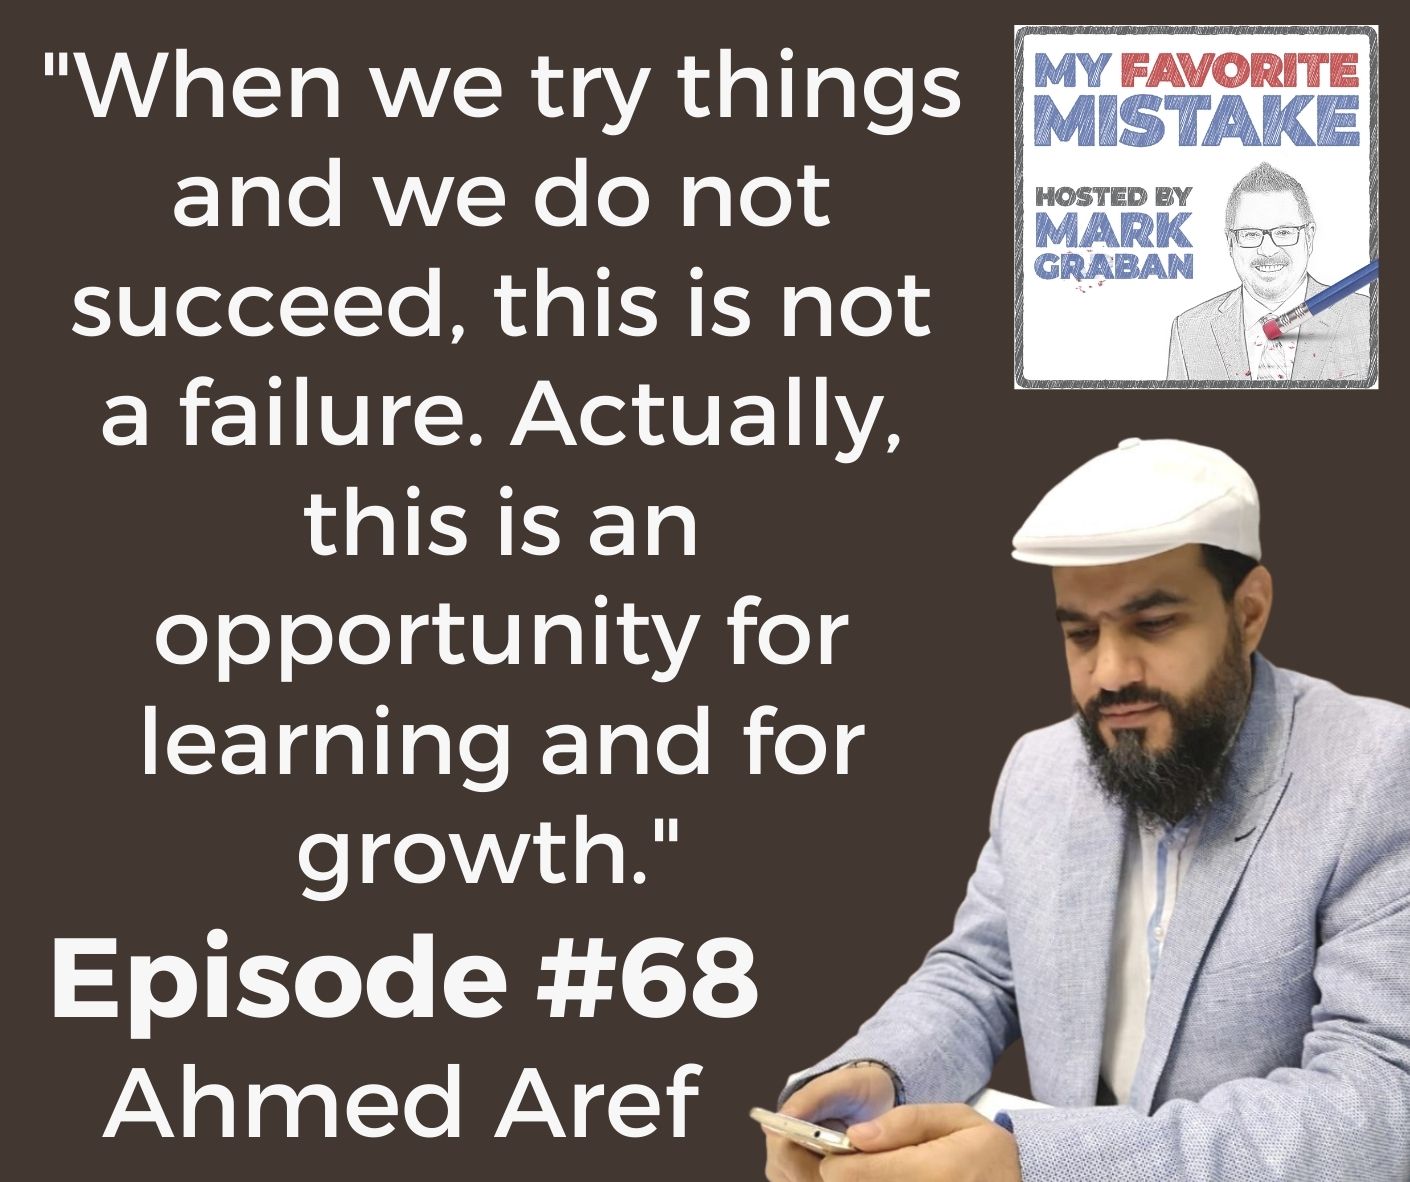 "When we try things and we do not succeed, this is not a failure. Actually, this is an opportunity for learning and for growth." 